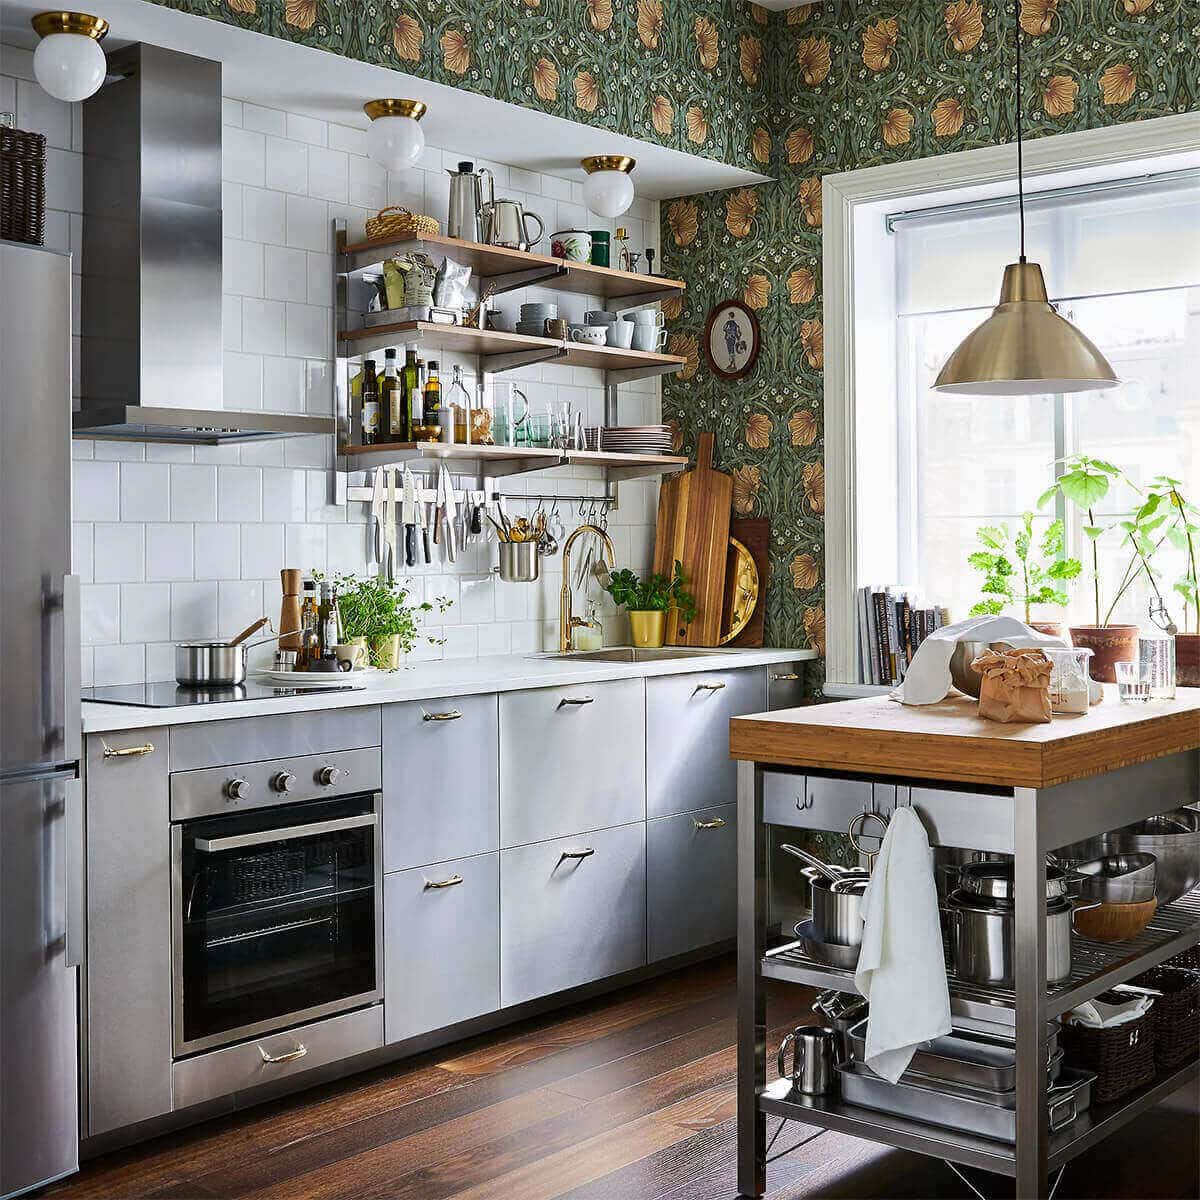 5 small kitchen ideas: how to transform a tiny space | maison flâneur